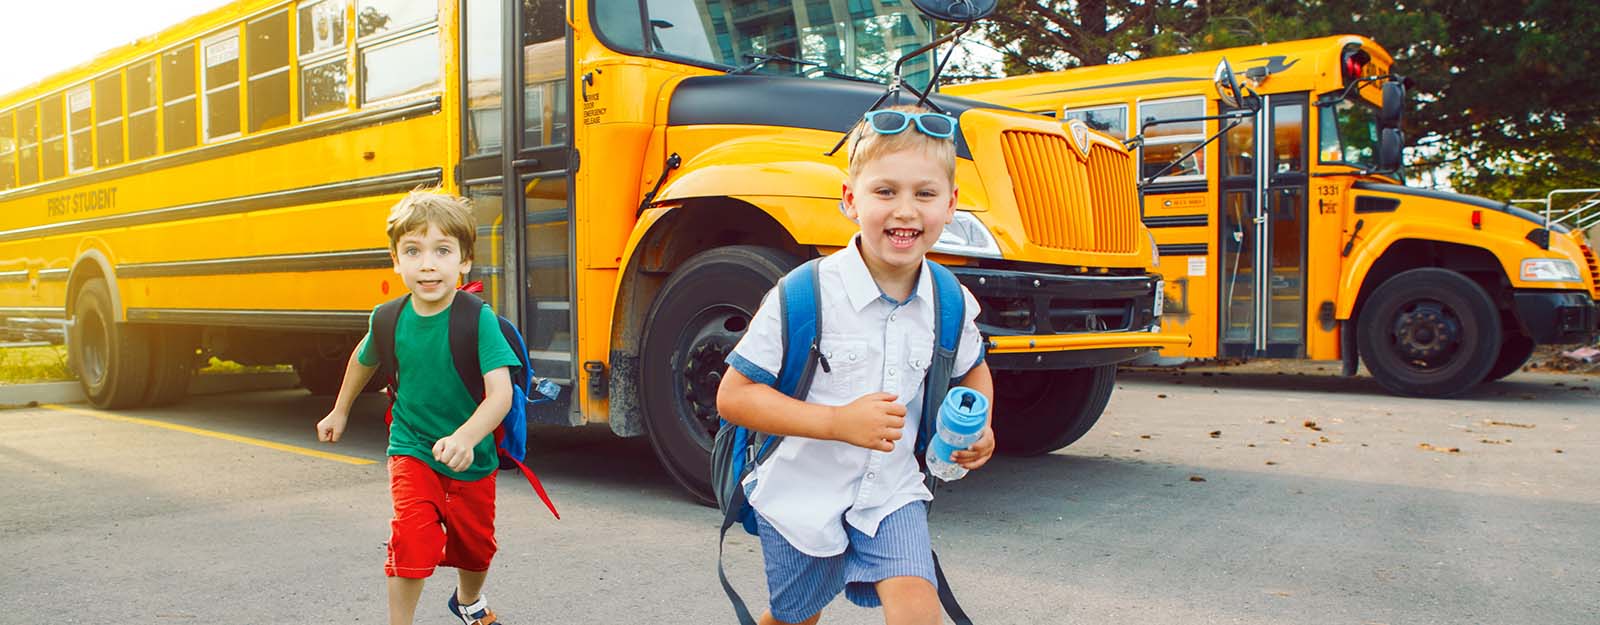 Kids with backpacks smiling while running off school bus